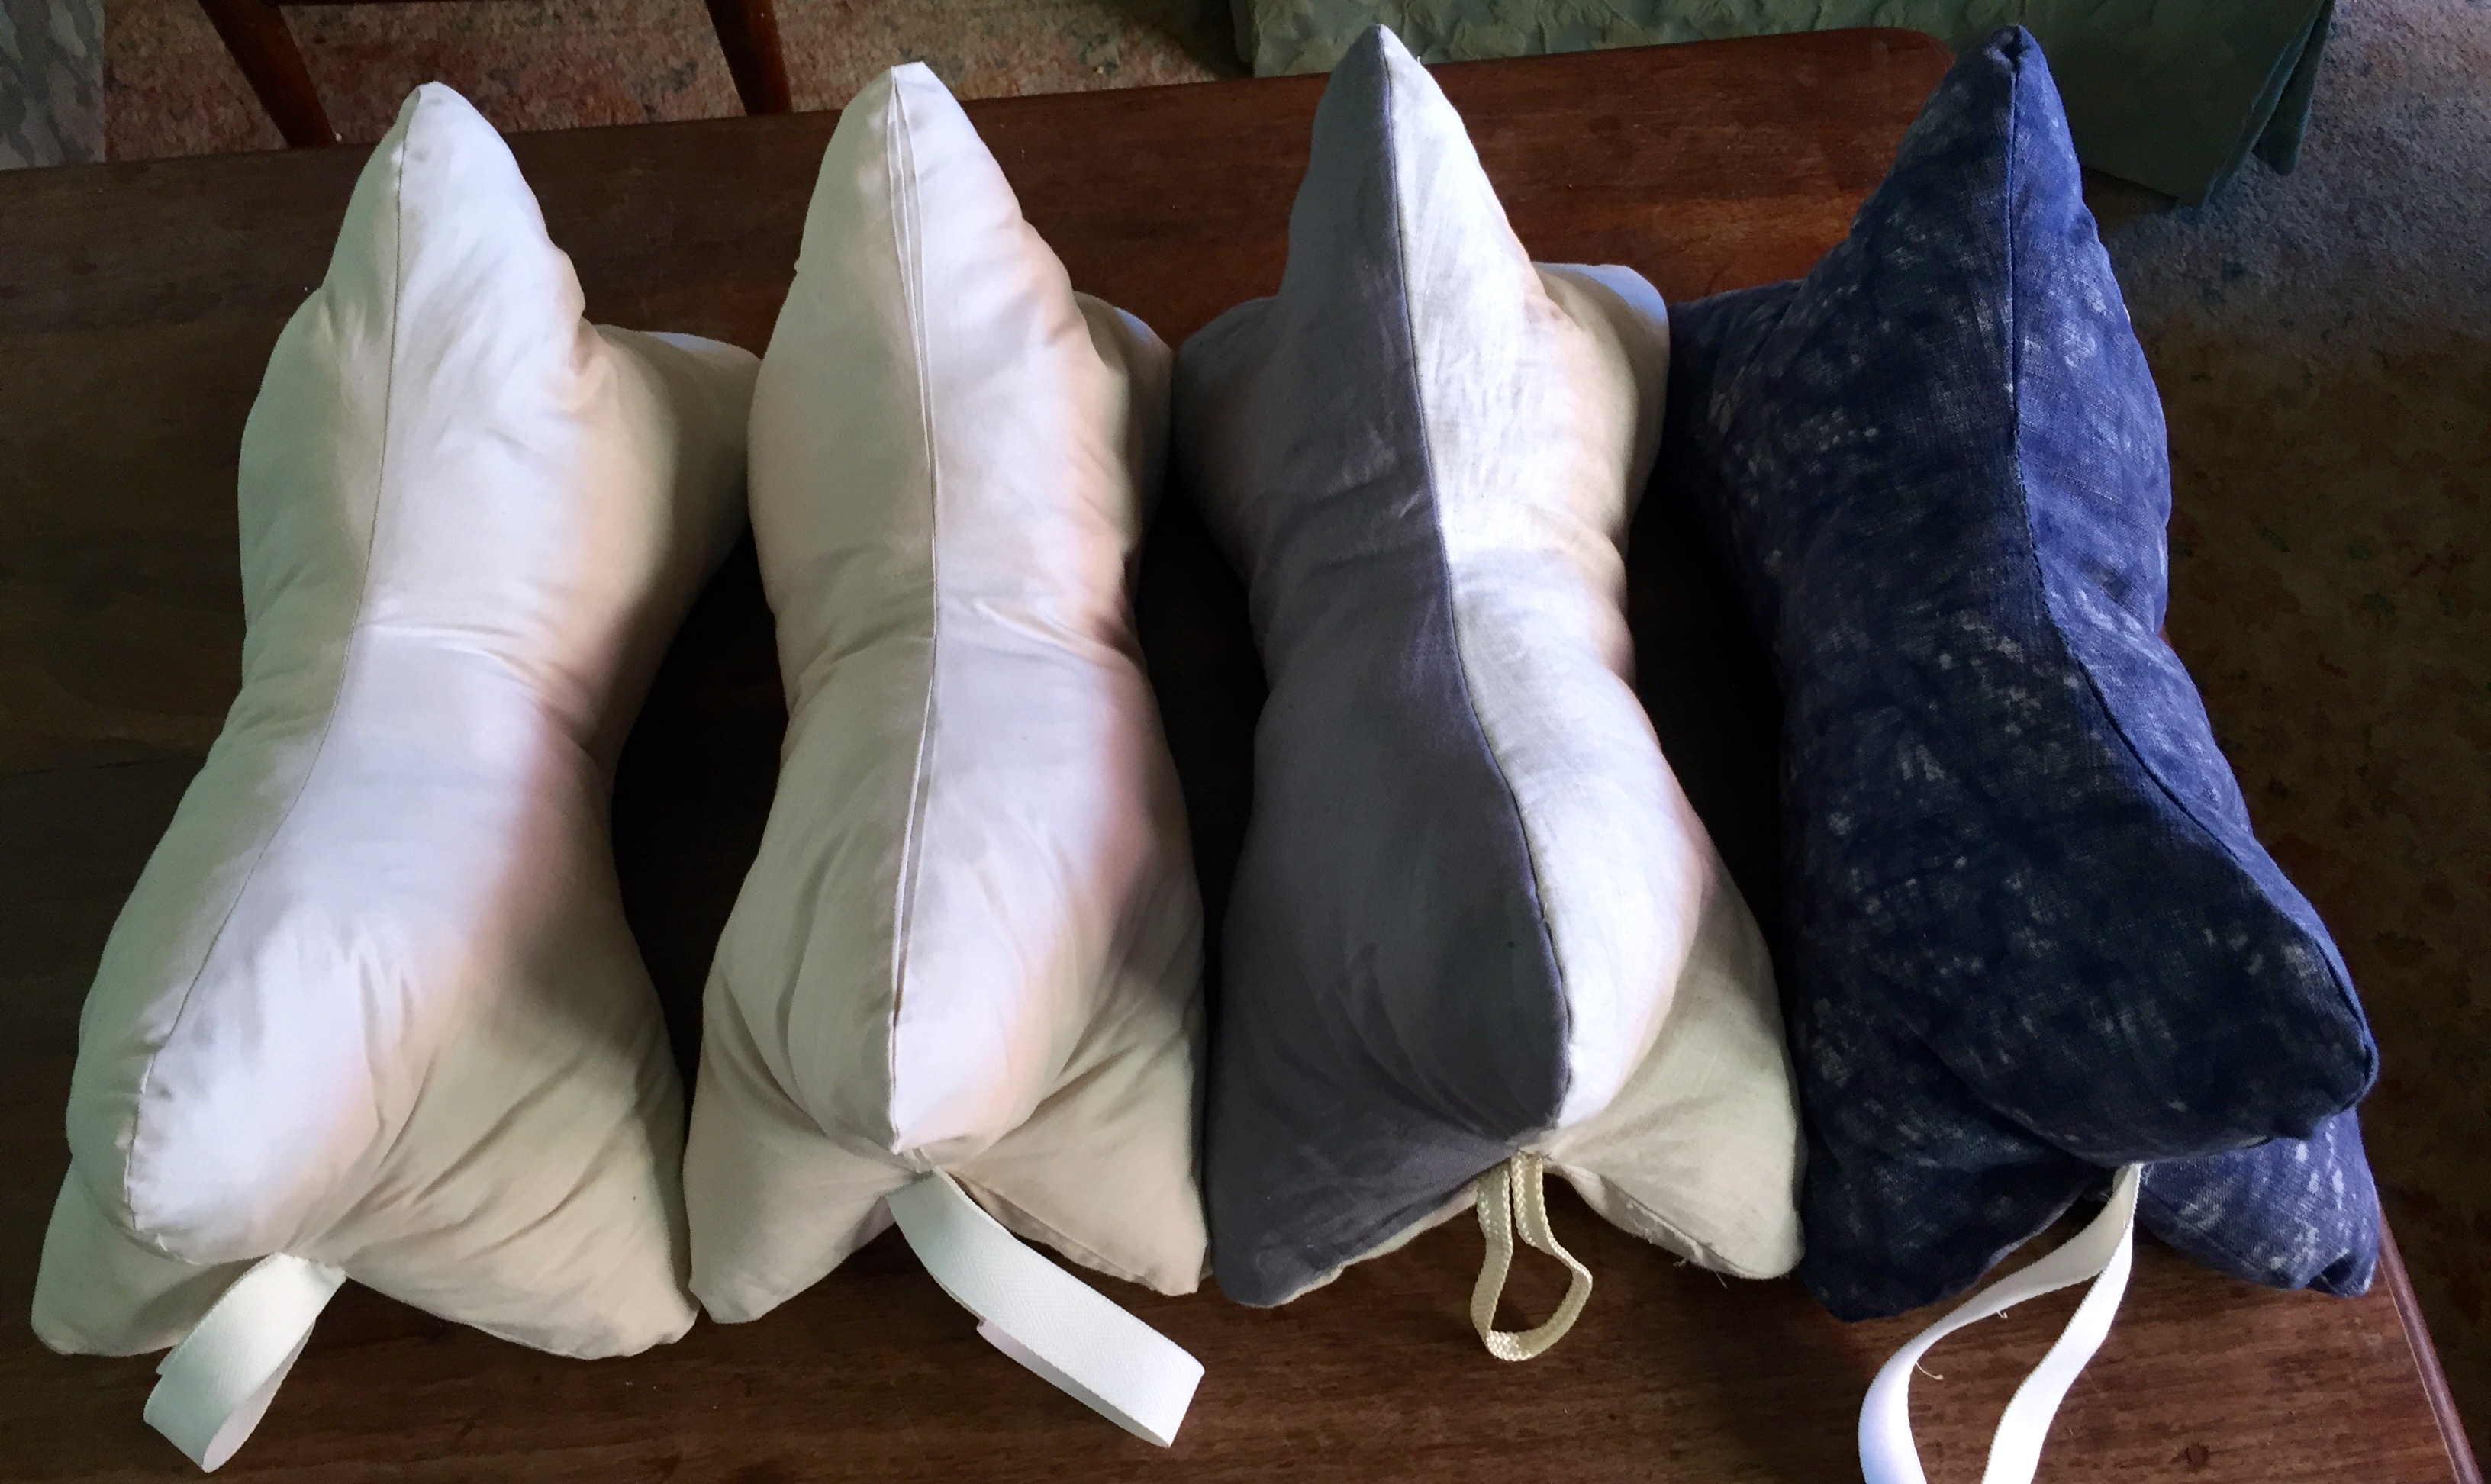 Pillow Stuffing Tips + Tricks - Sew4Home